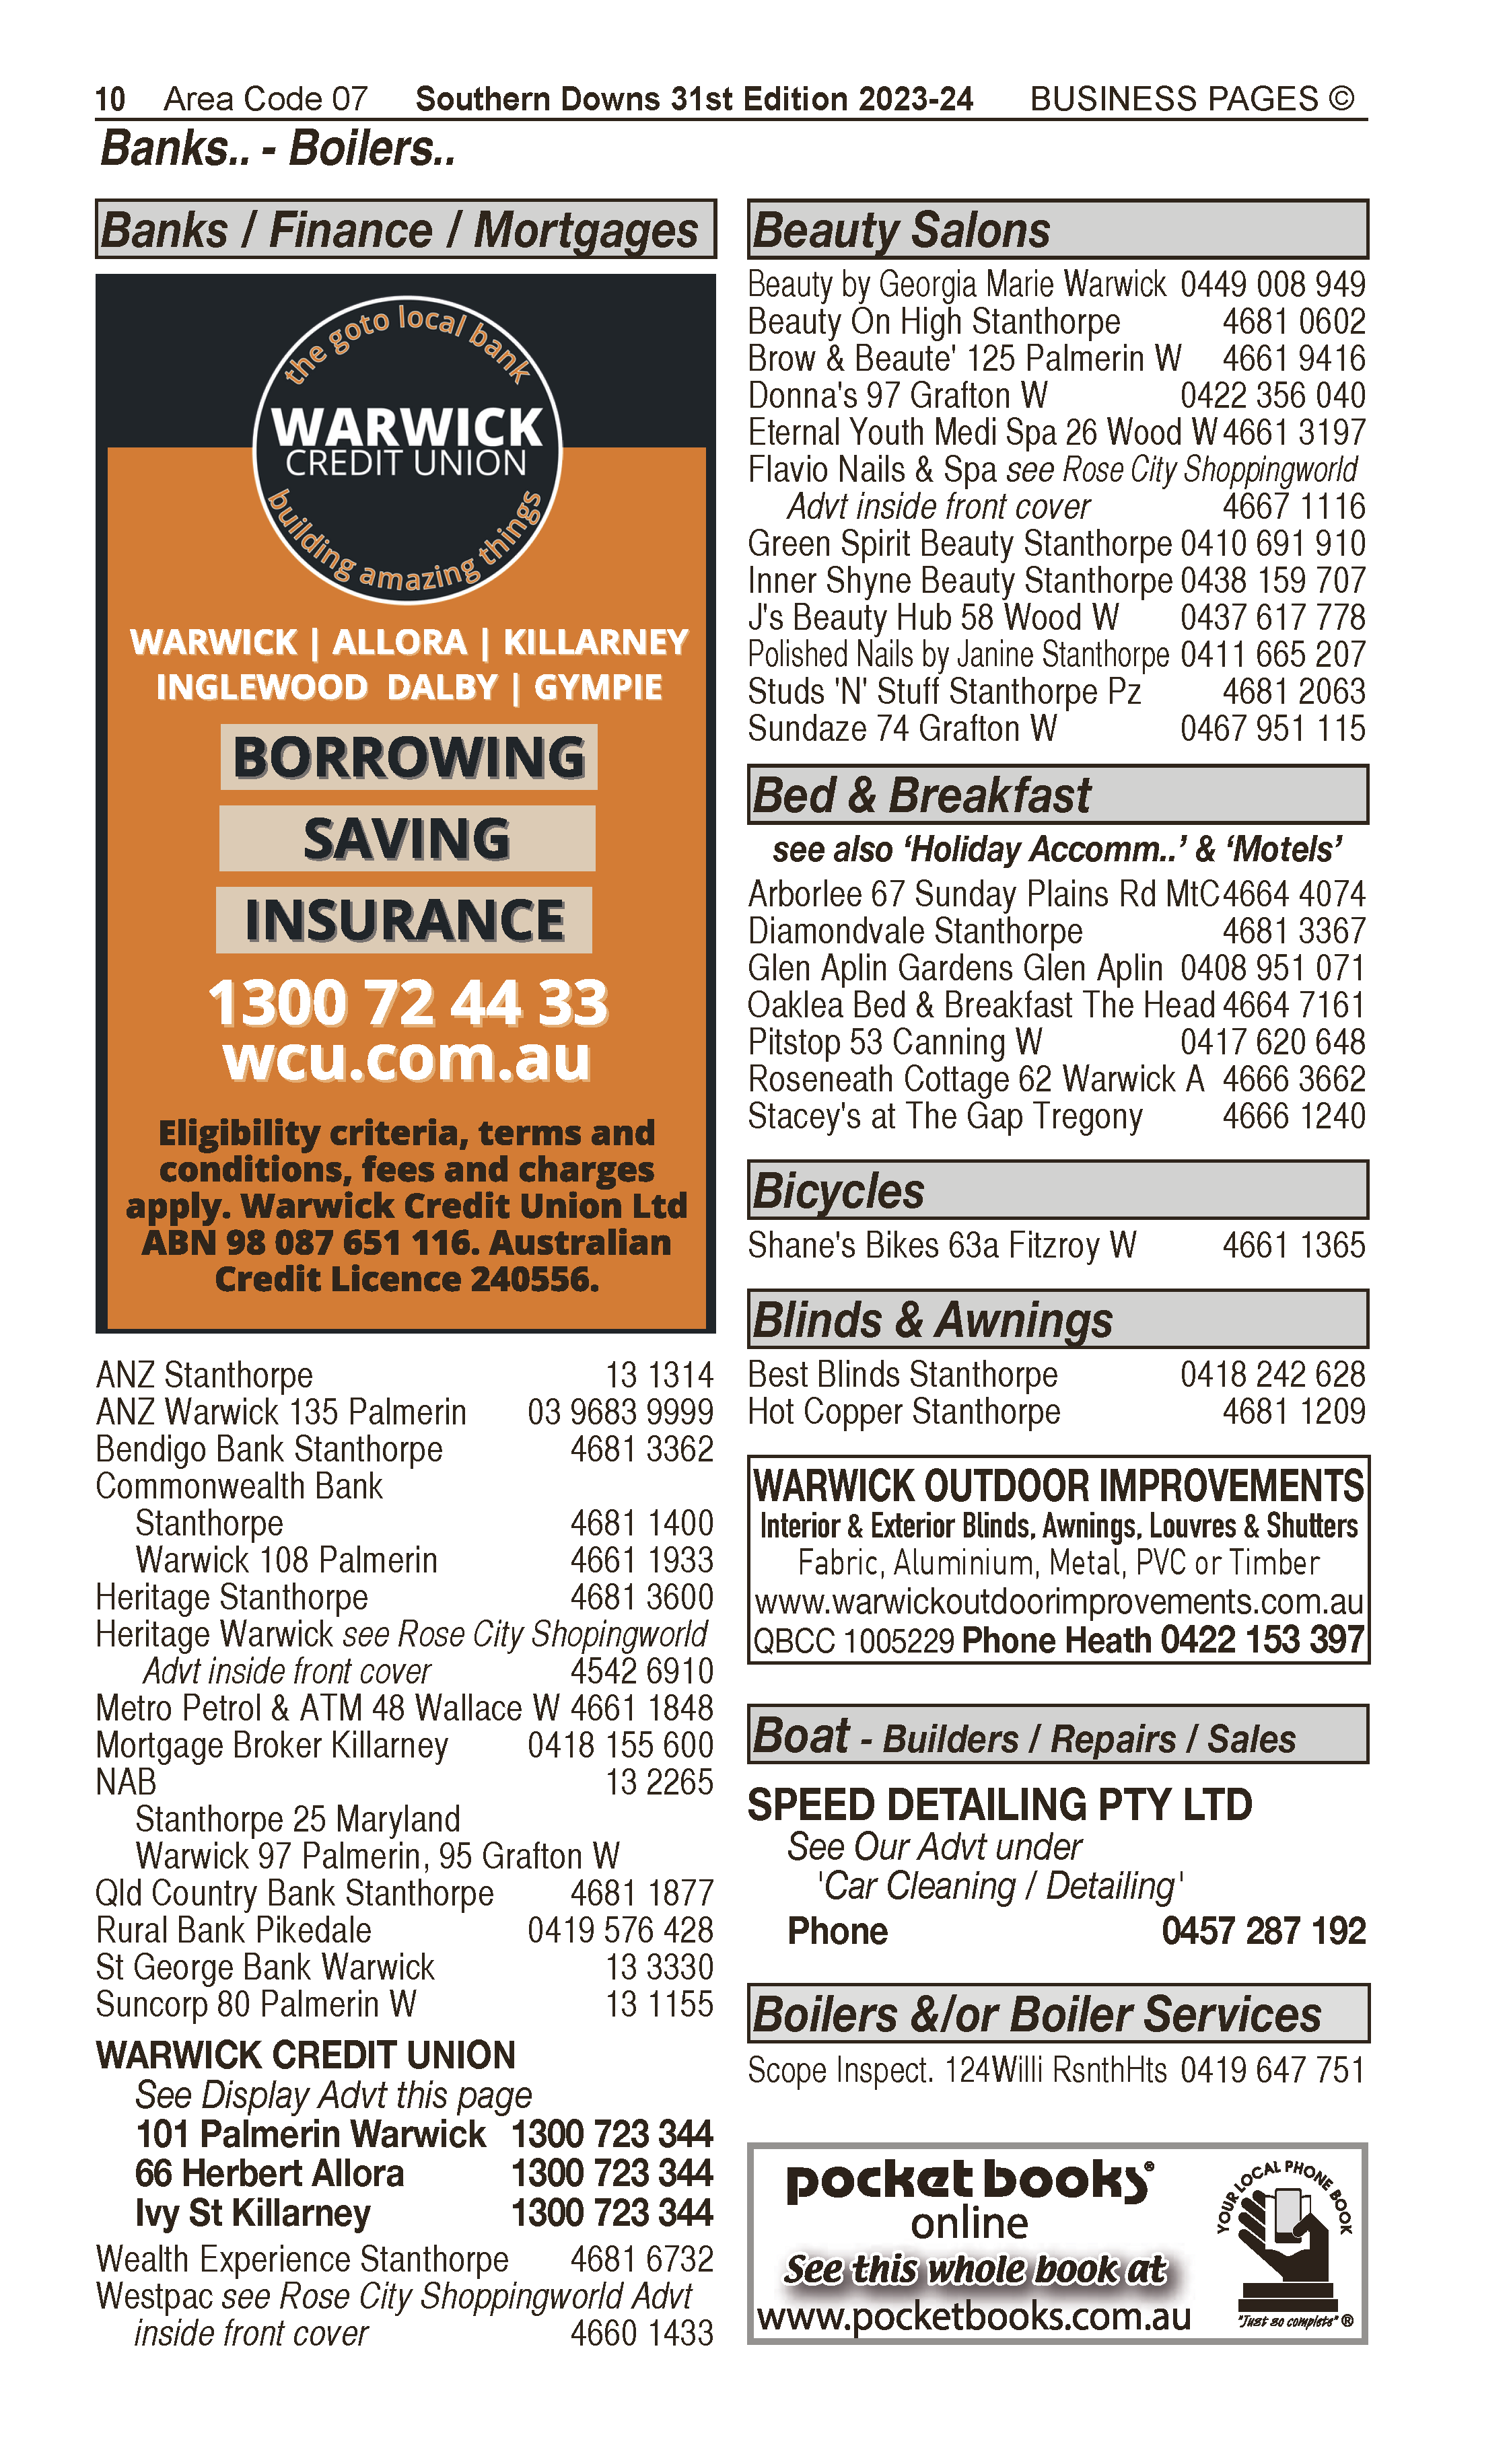 Southern Downs Ag | Agricultural – Machinery & Services in Warwick | PBezy Pocket Books local directories - page 10